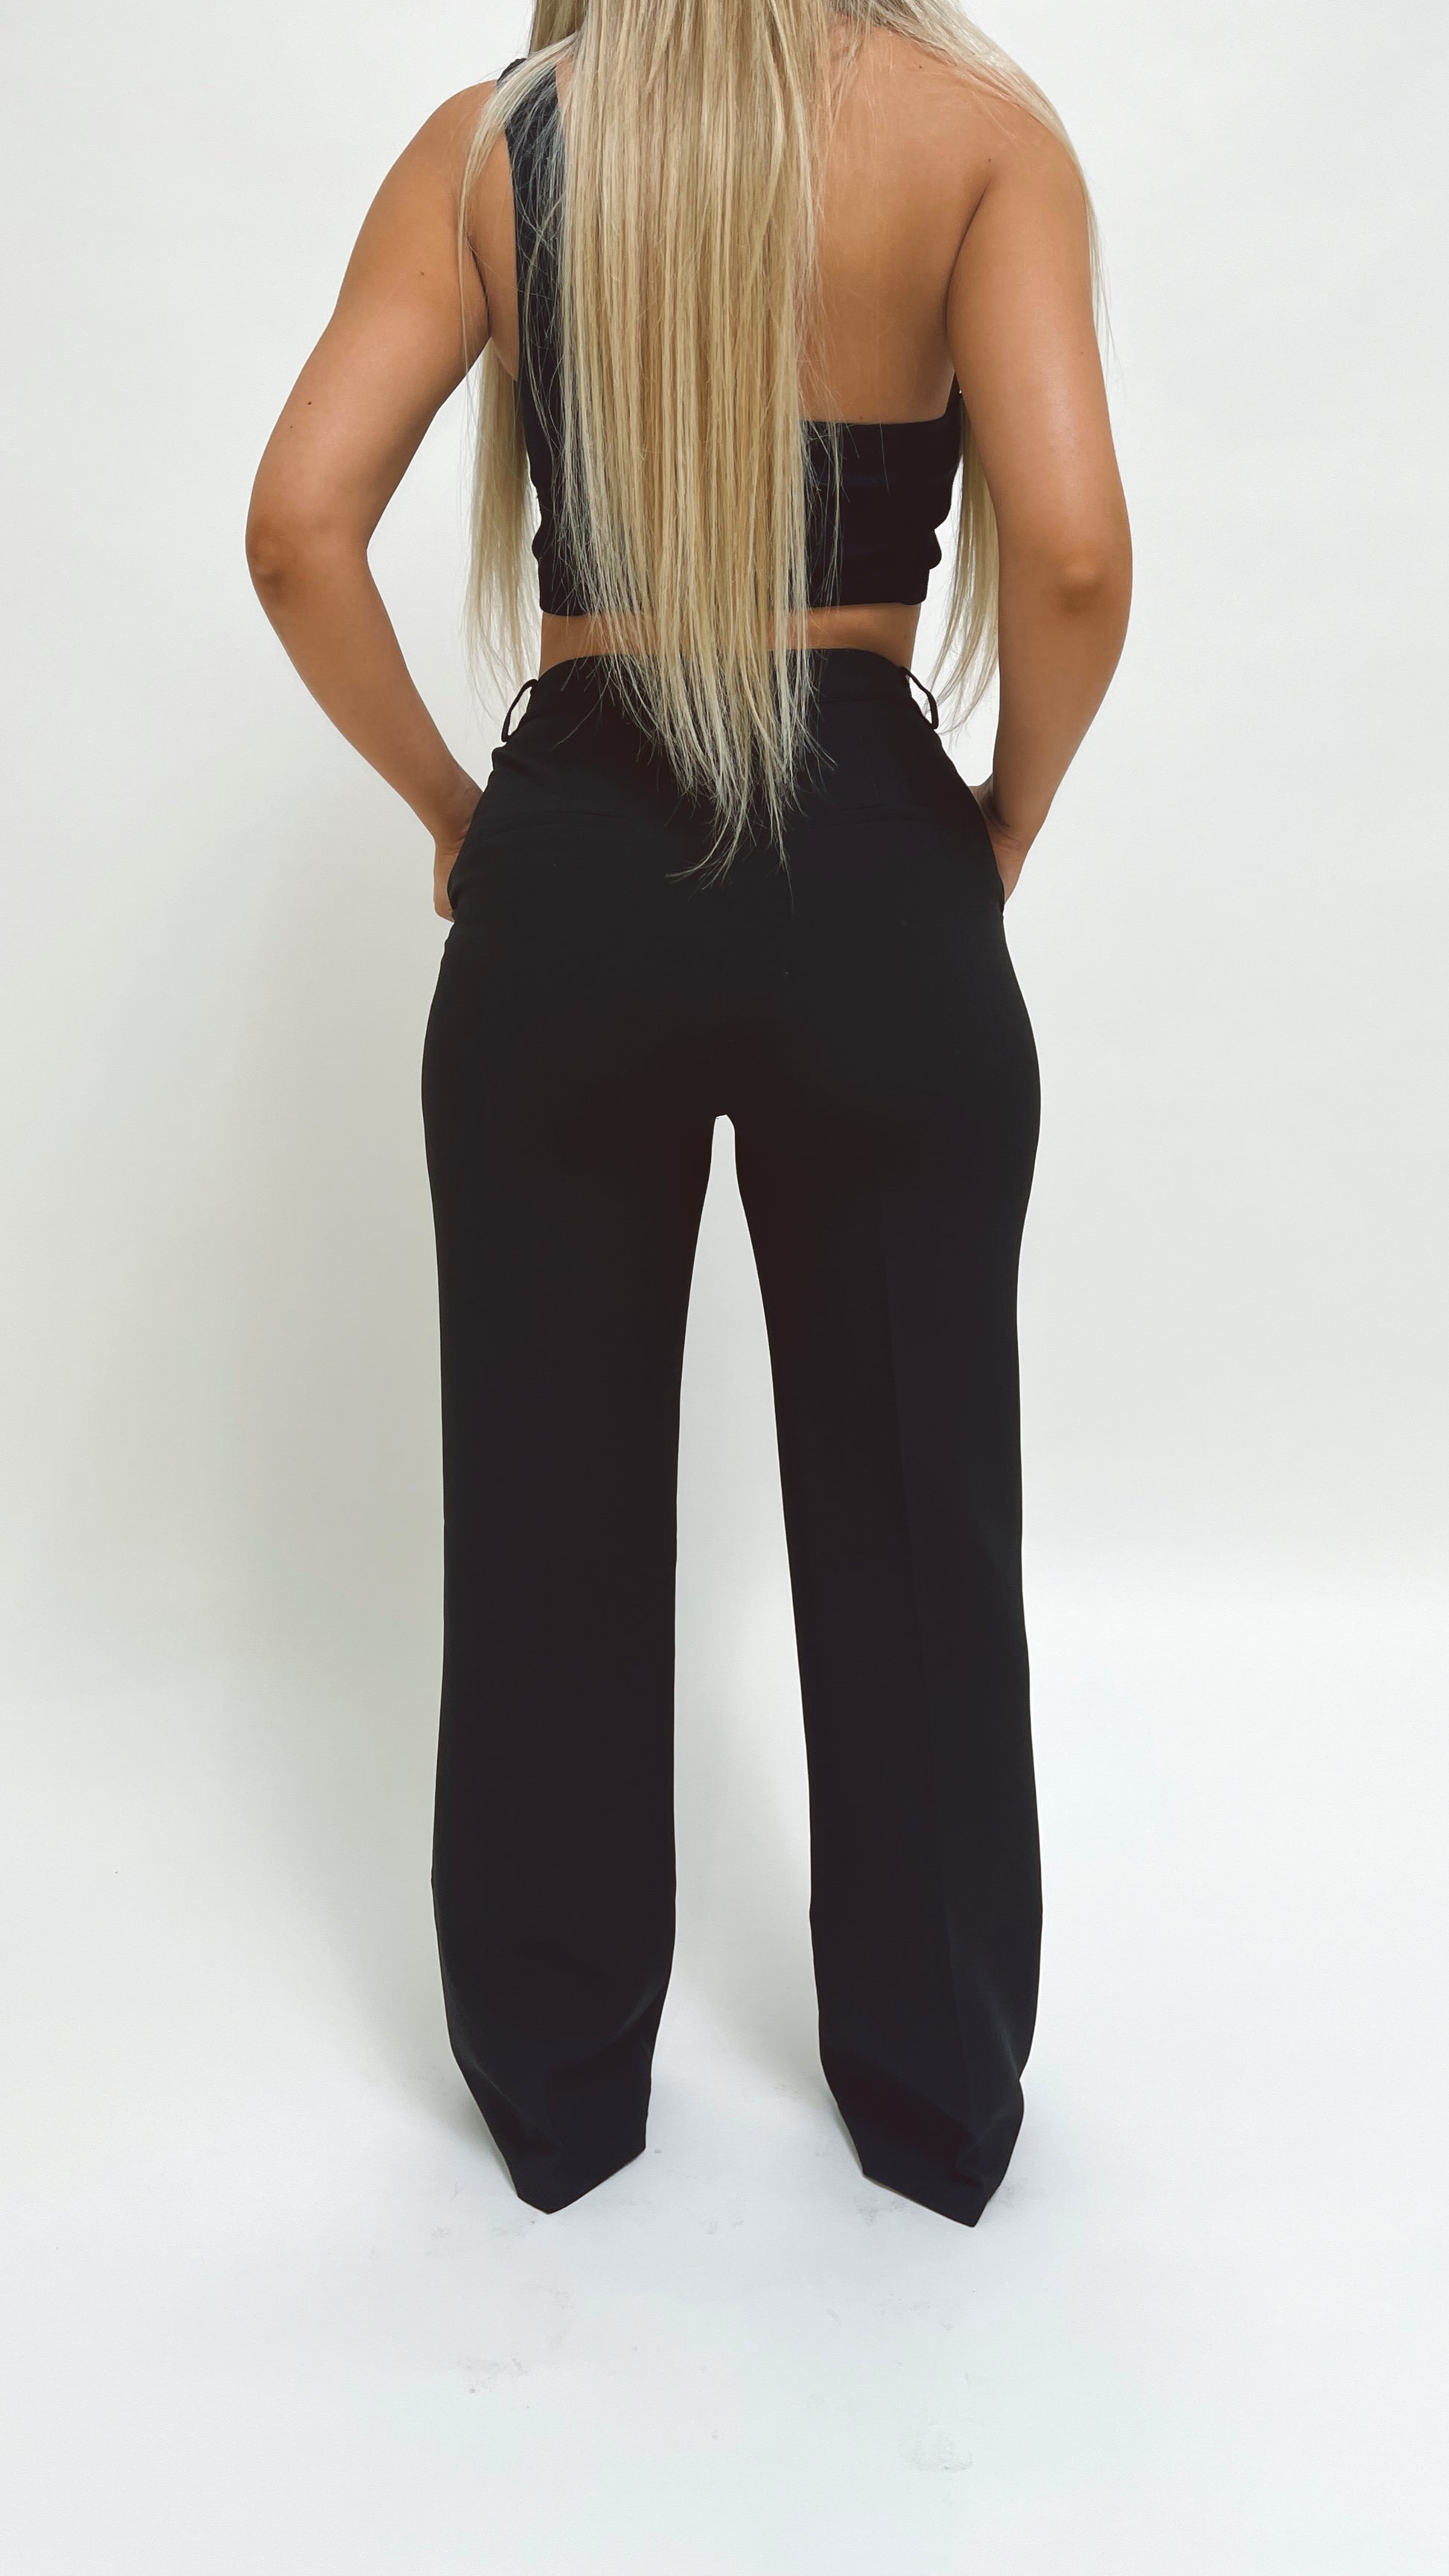 High waisted wide leg pants strikes again! (5'2) Any if you petite